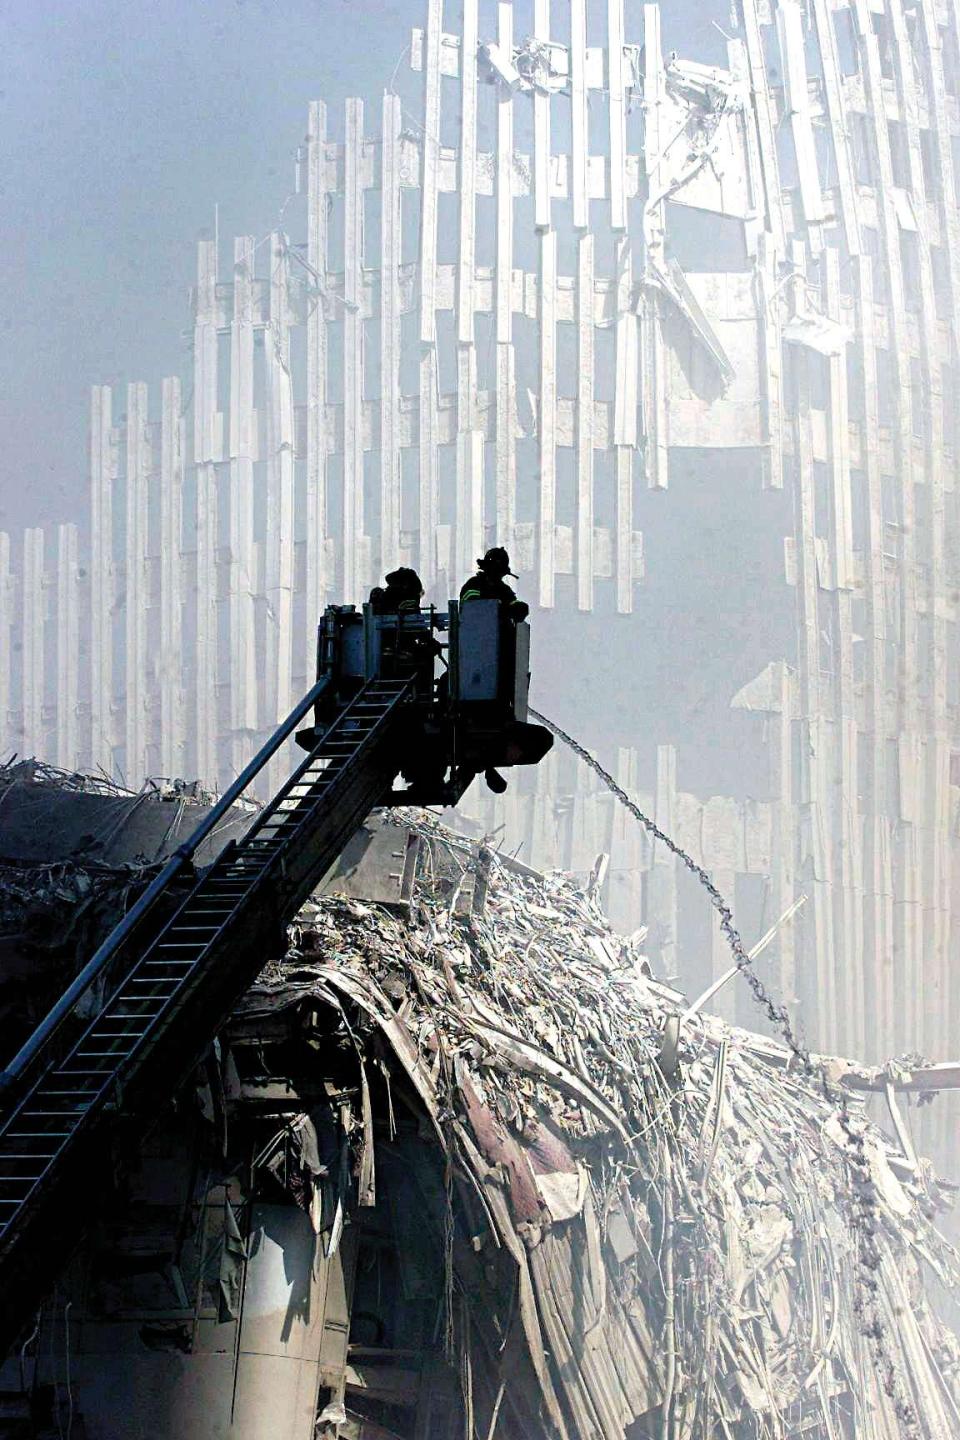 More than 17,000 World Trade Center first responders have been diagnosed with cancer and at least 1,650 have died from the disease, according to the Centers for Disease Control and Prevention.